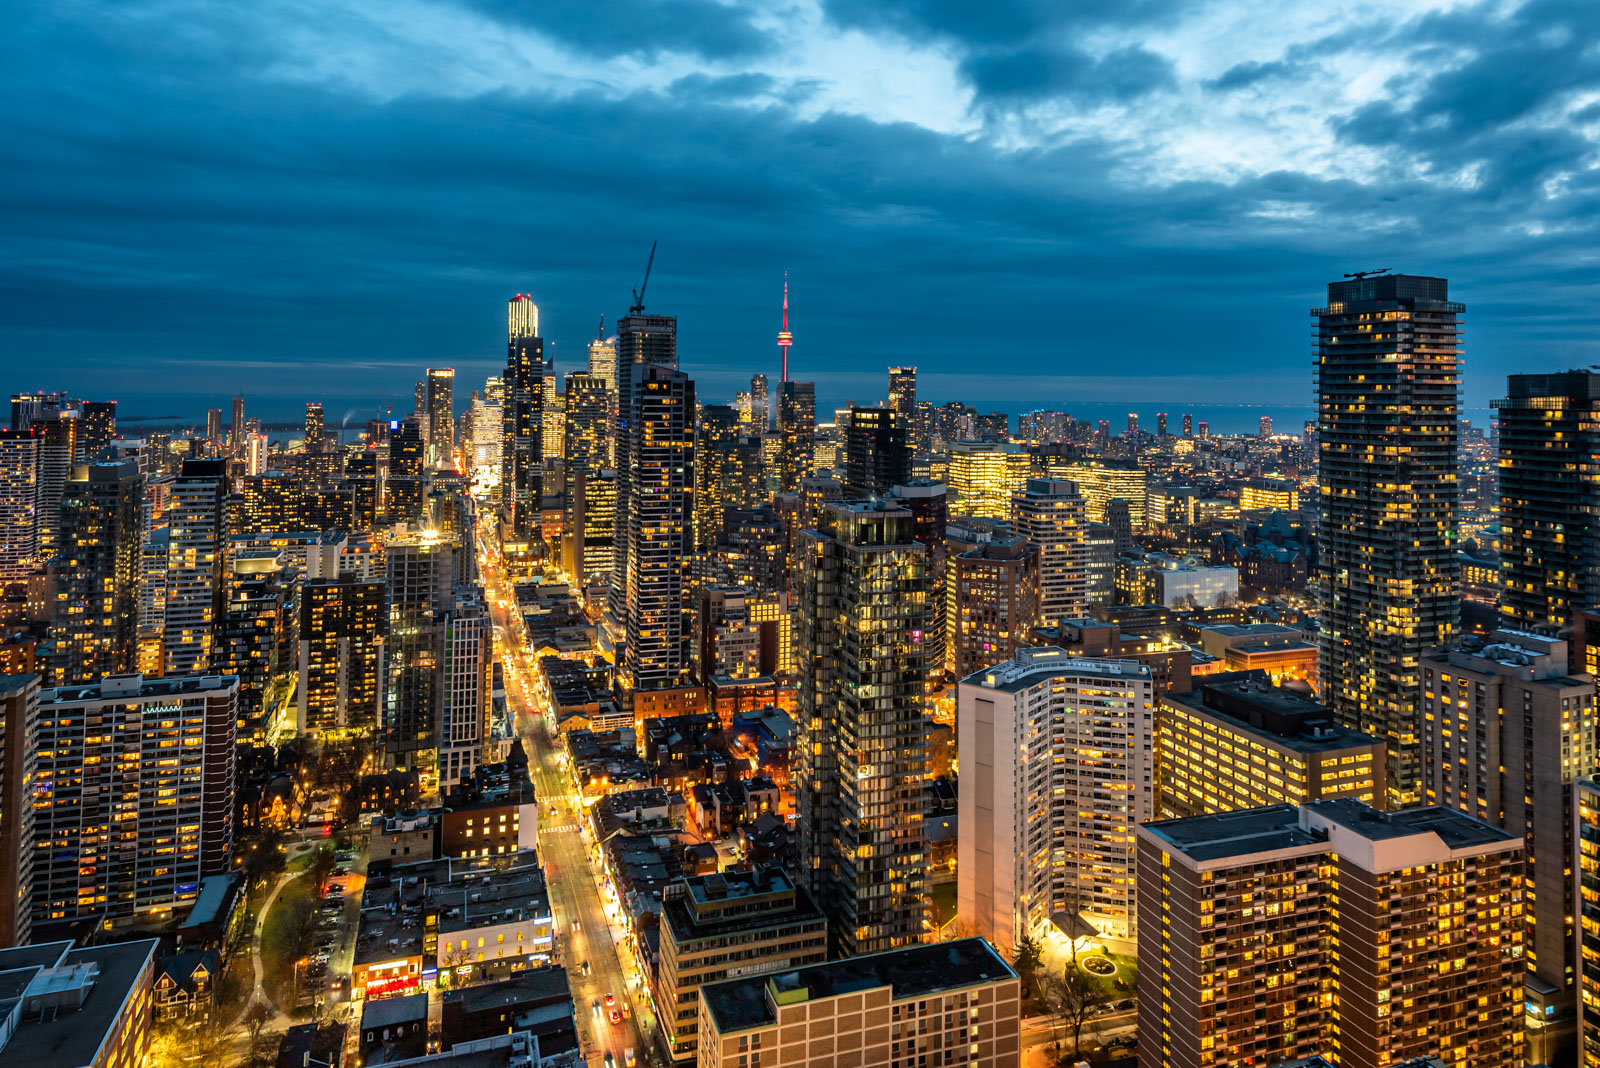 Toronto skyline at night with view of streets below, buildings and sky.